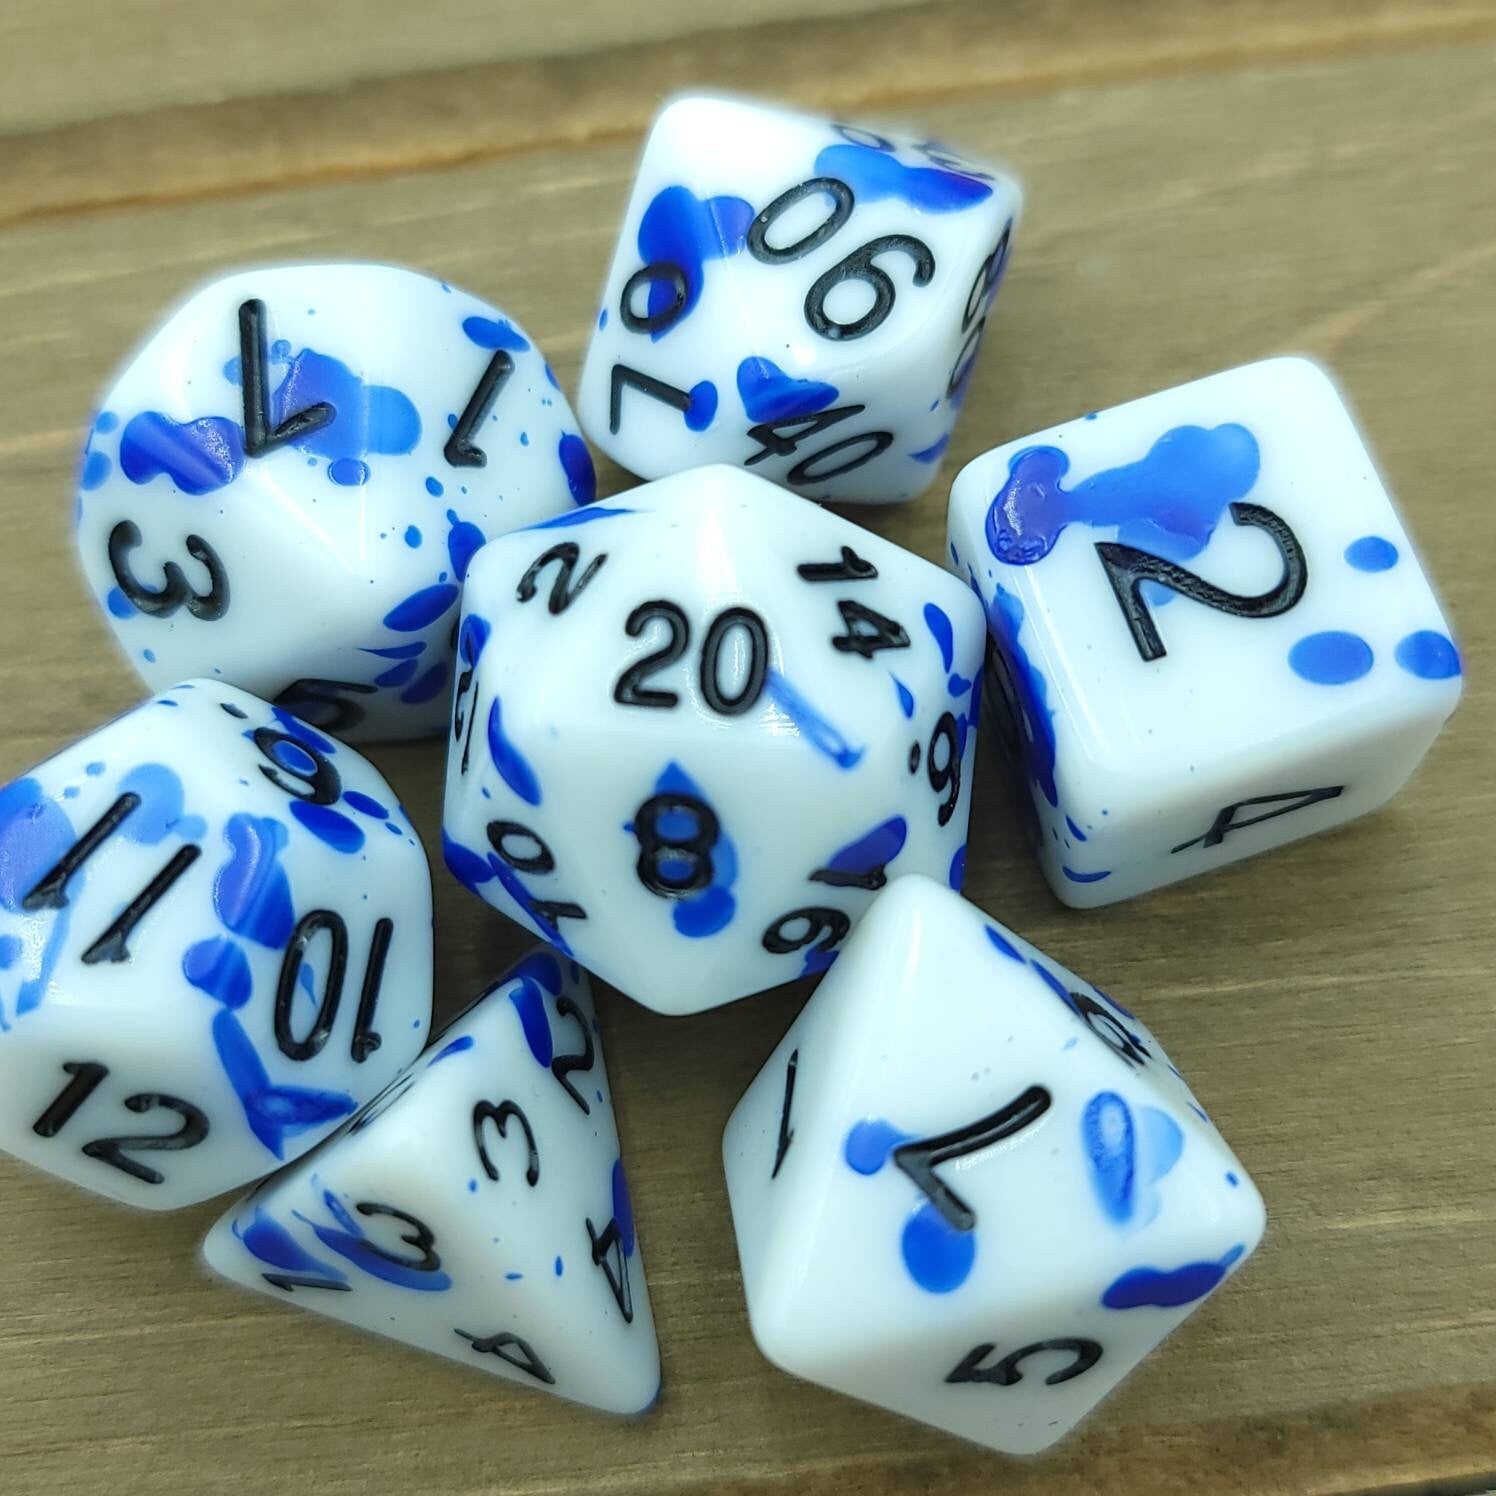 Nobles Blood | RPG Dice Set| RPG Dice | Polyhedral Dice Set | Dungeons and Dragons | DnD Dice Set | Gaming Dice Set